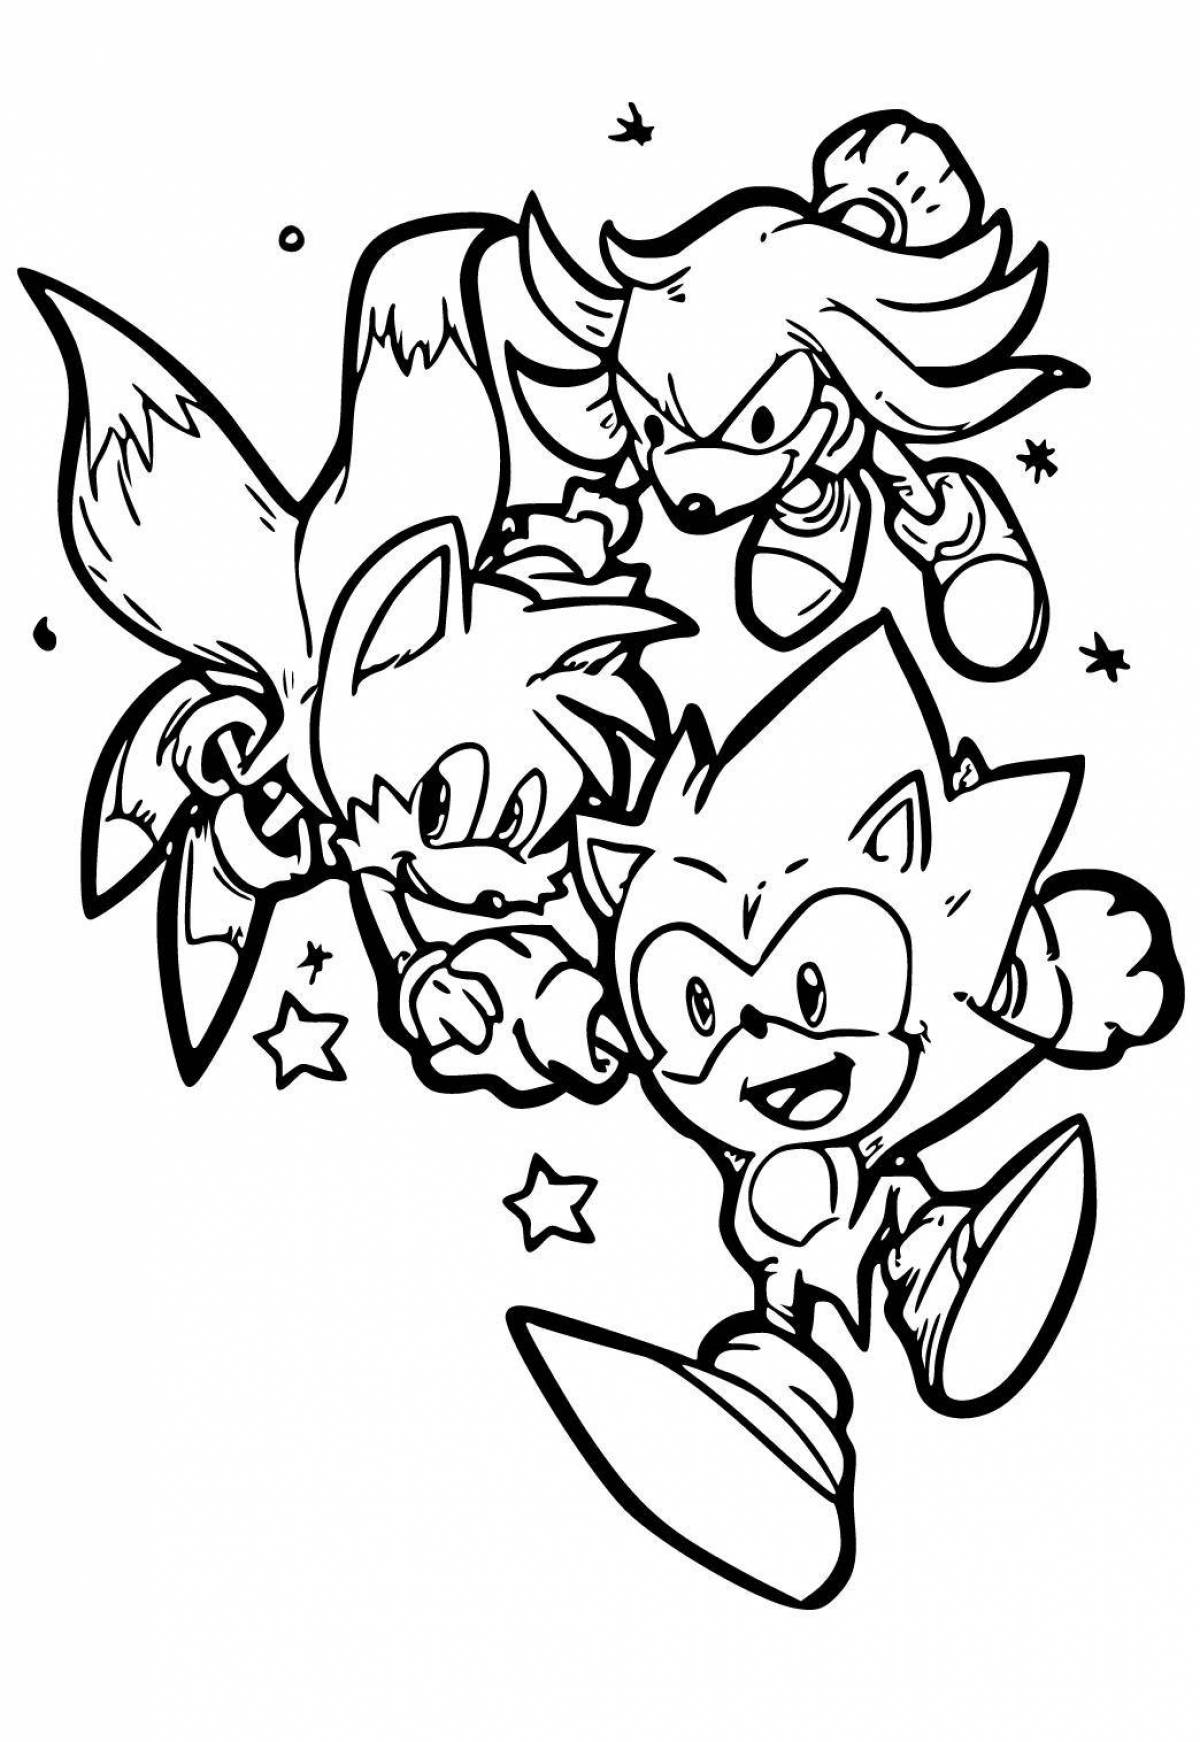 Radiantly coloring page sonic with crystals